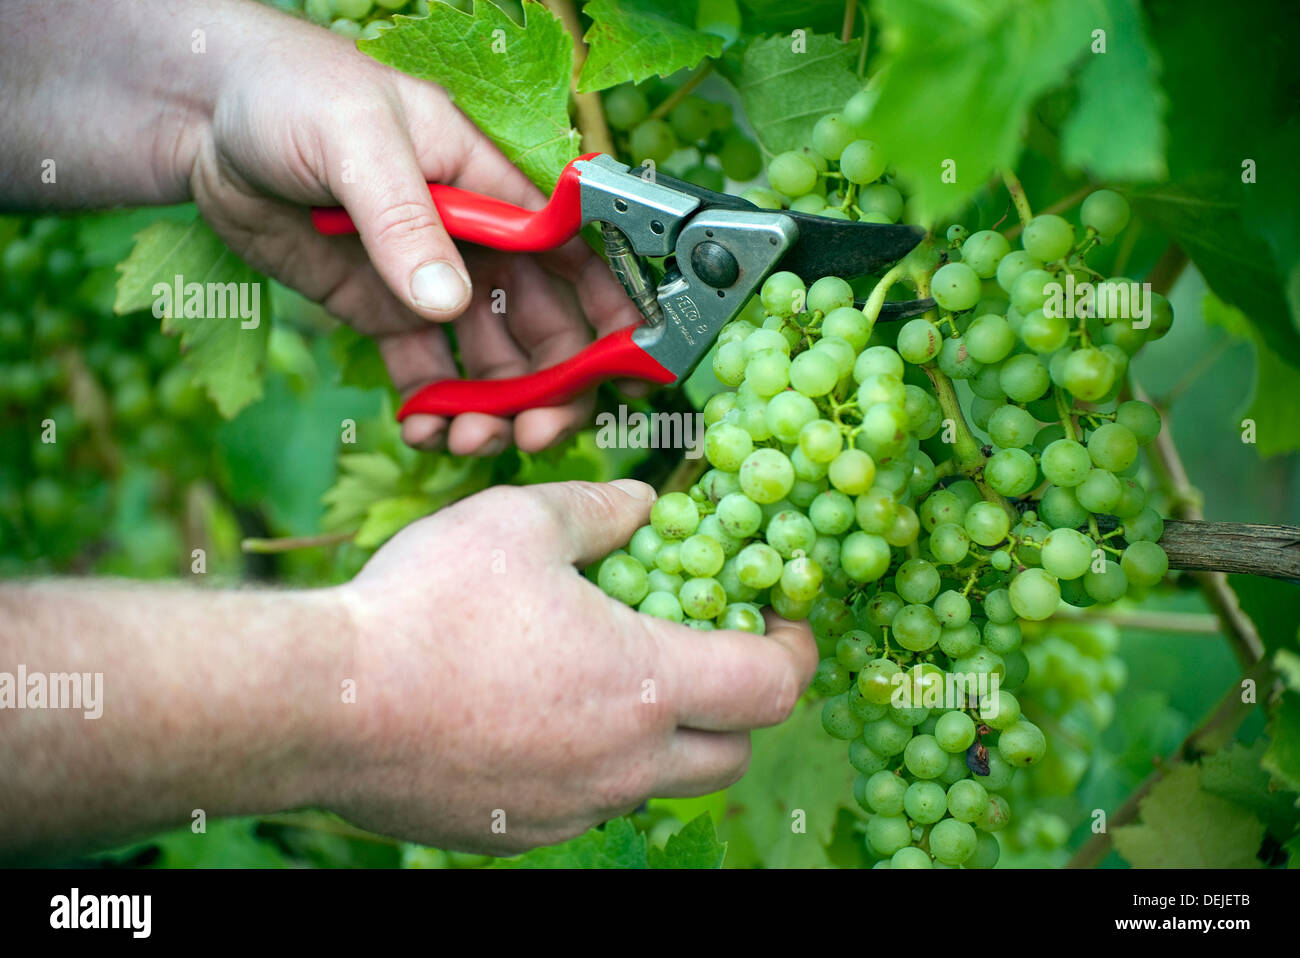 person cutting green grapes on grape vine, essex, england Stock Photo